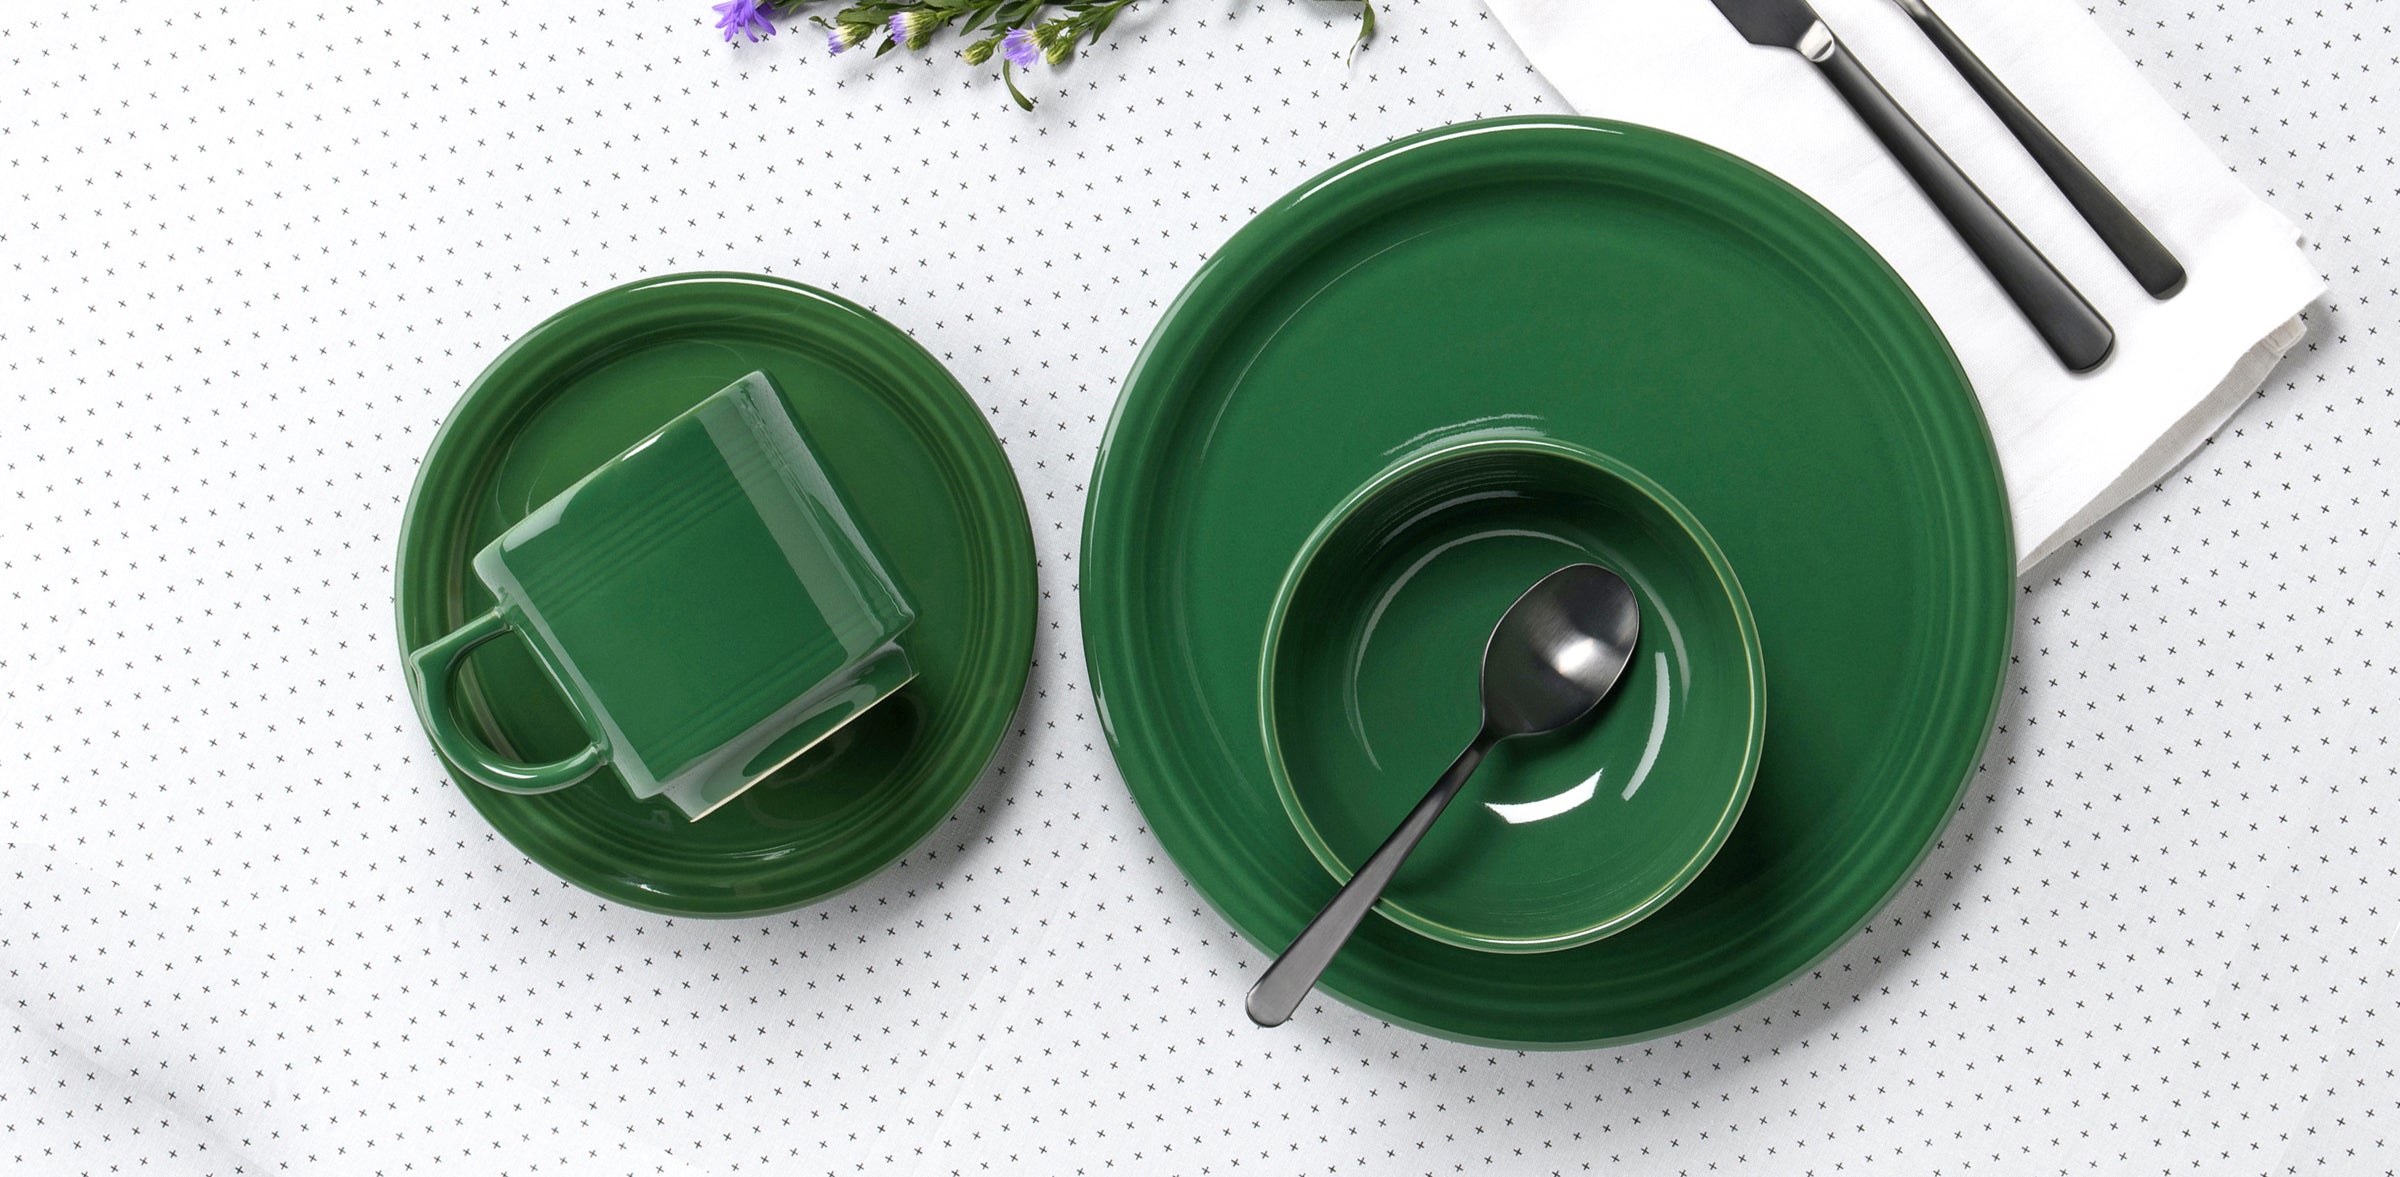 4 piece place setting in Jade color. Place setting is set on white and black patterend tablecloth. Also on the table is flatware and purple flower